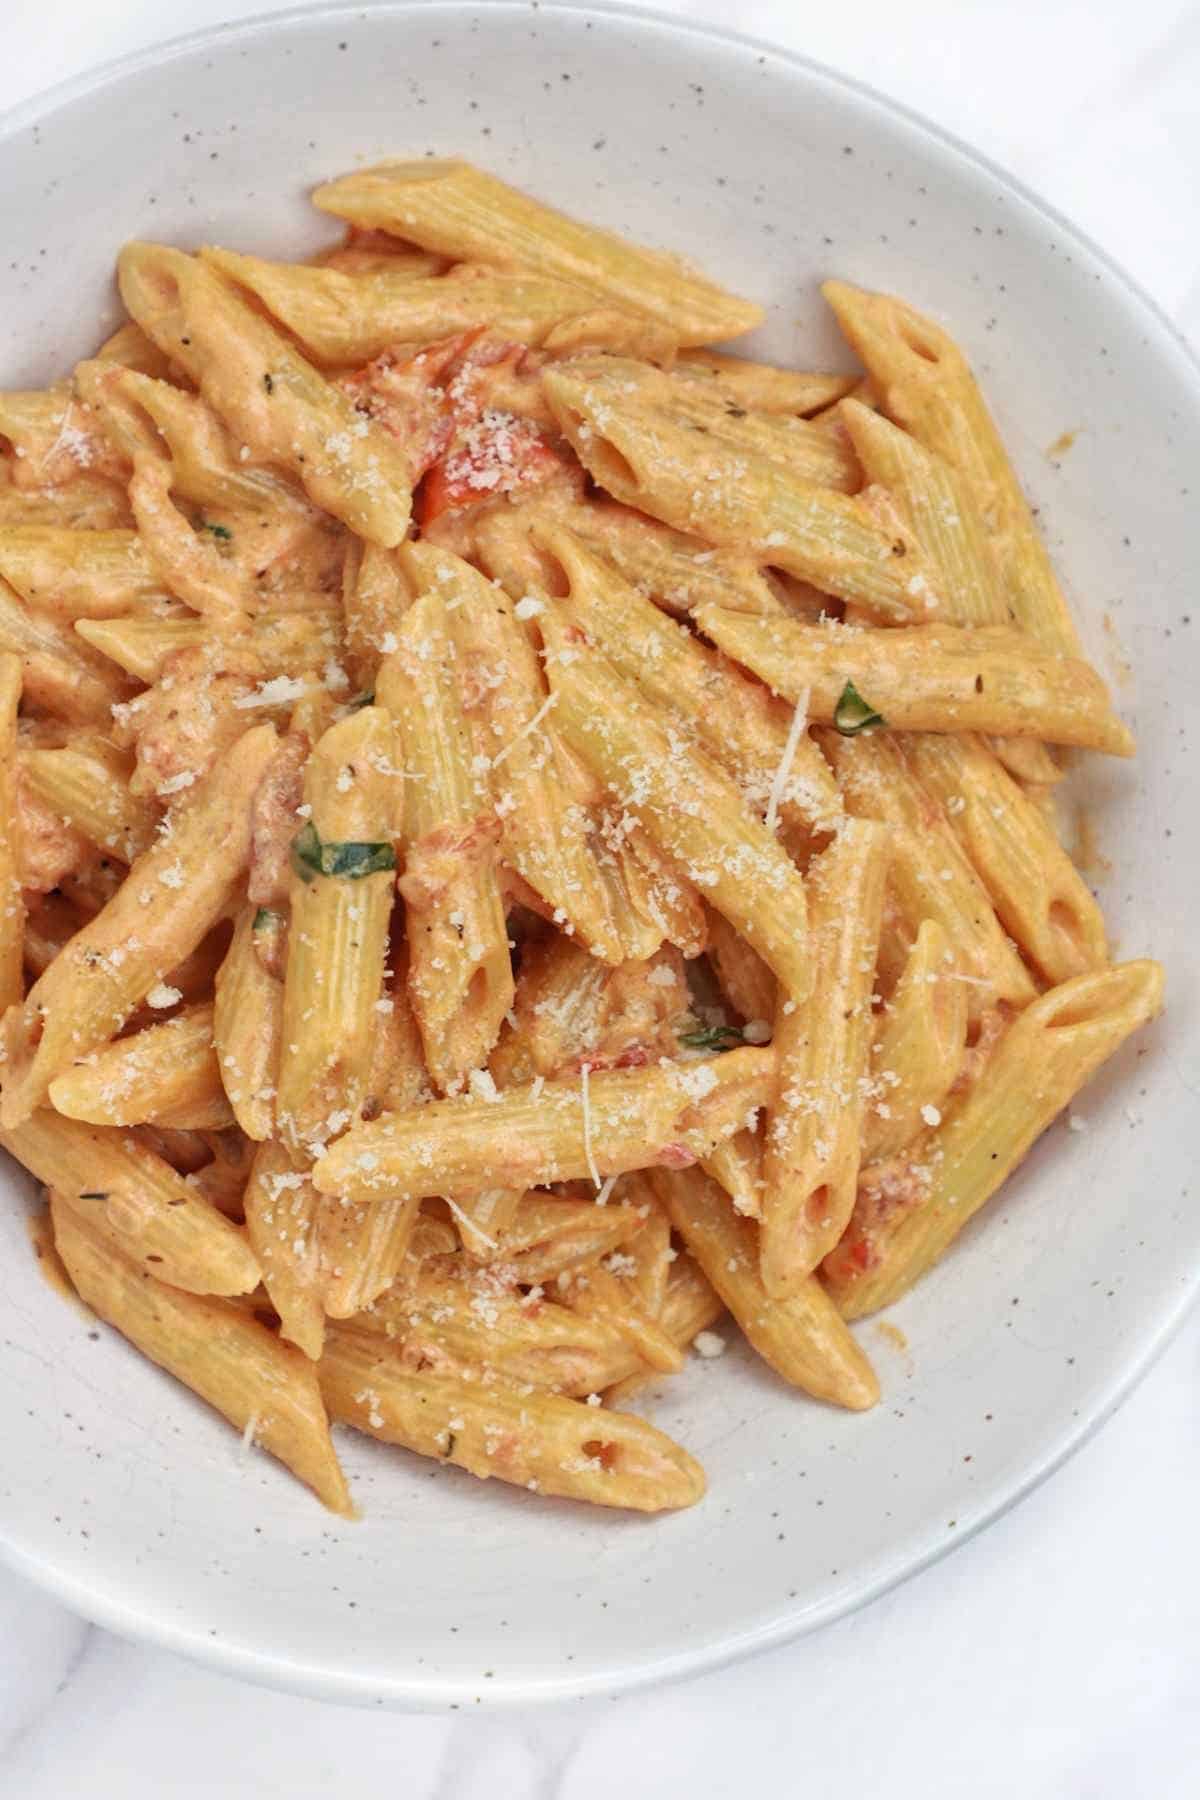 tomato pasta served with parmesan.